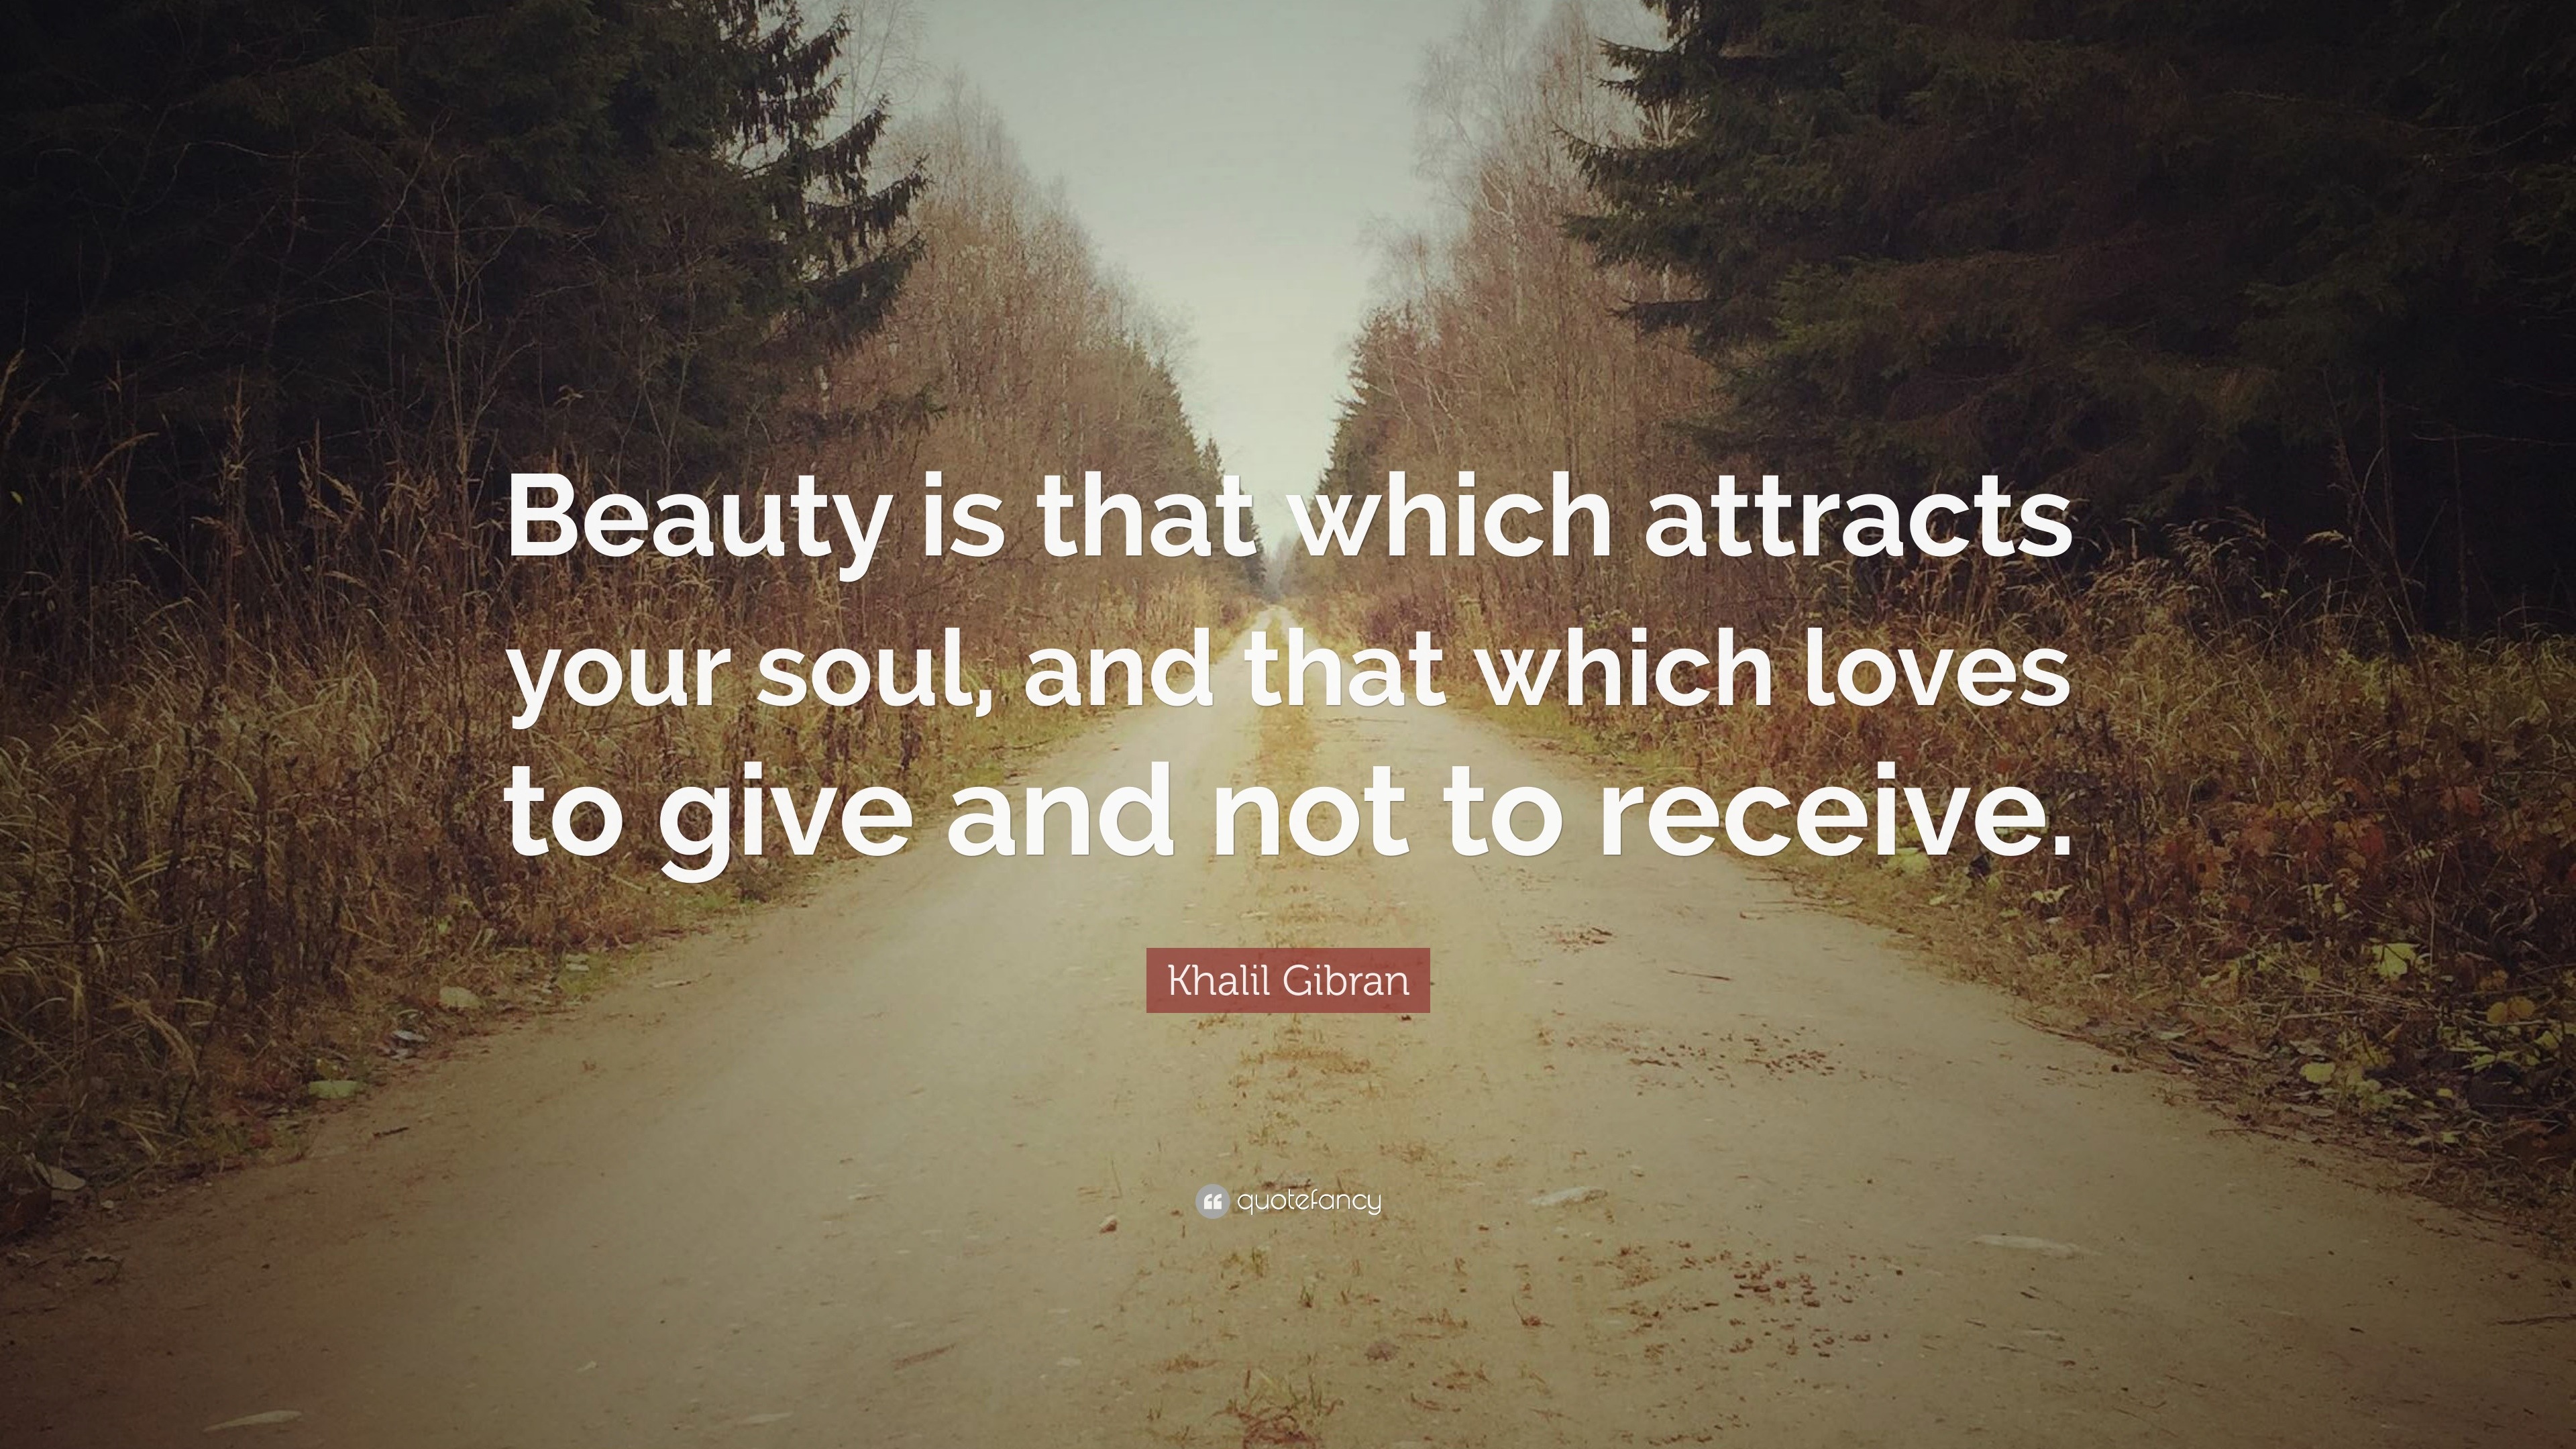 Khalil Gibran Quote: “Beauty is that which attracts your soul, and that ...